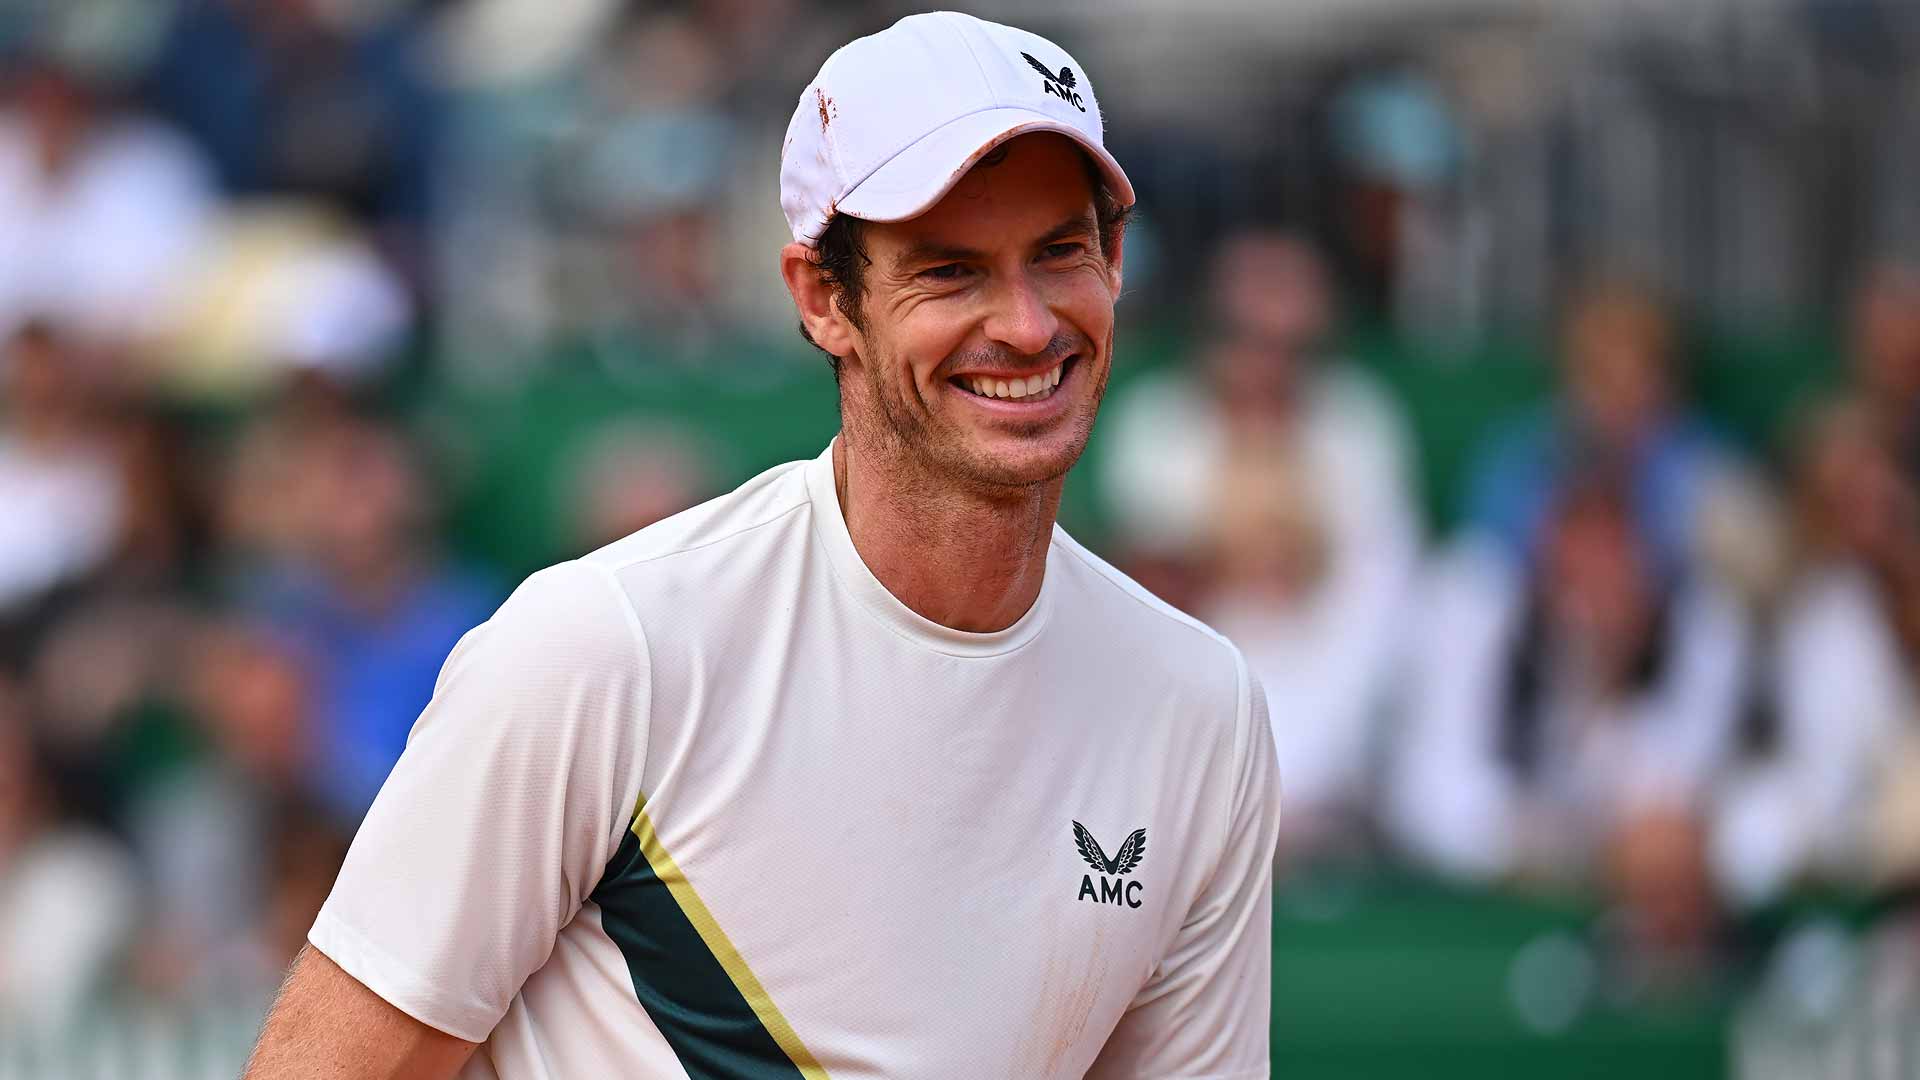 Andy Murray will next compete in Madrid.